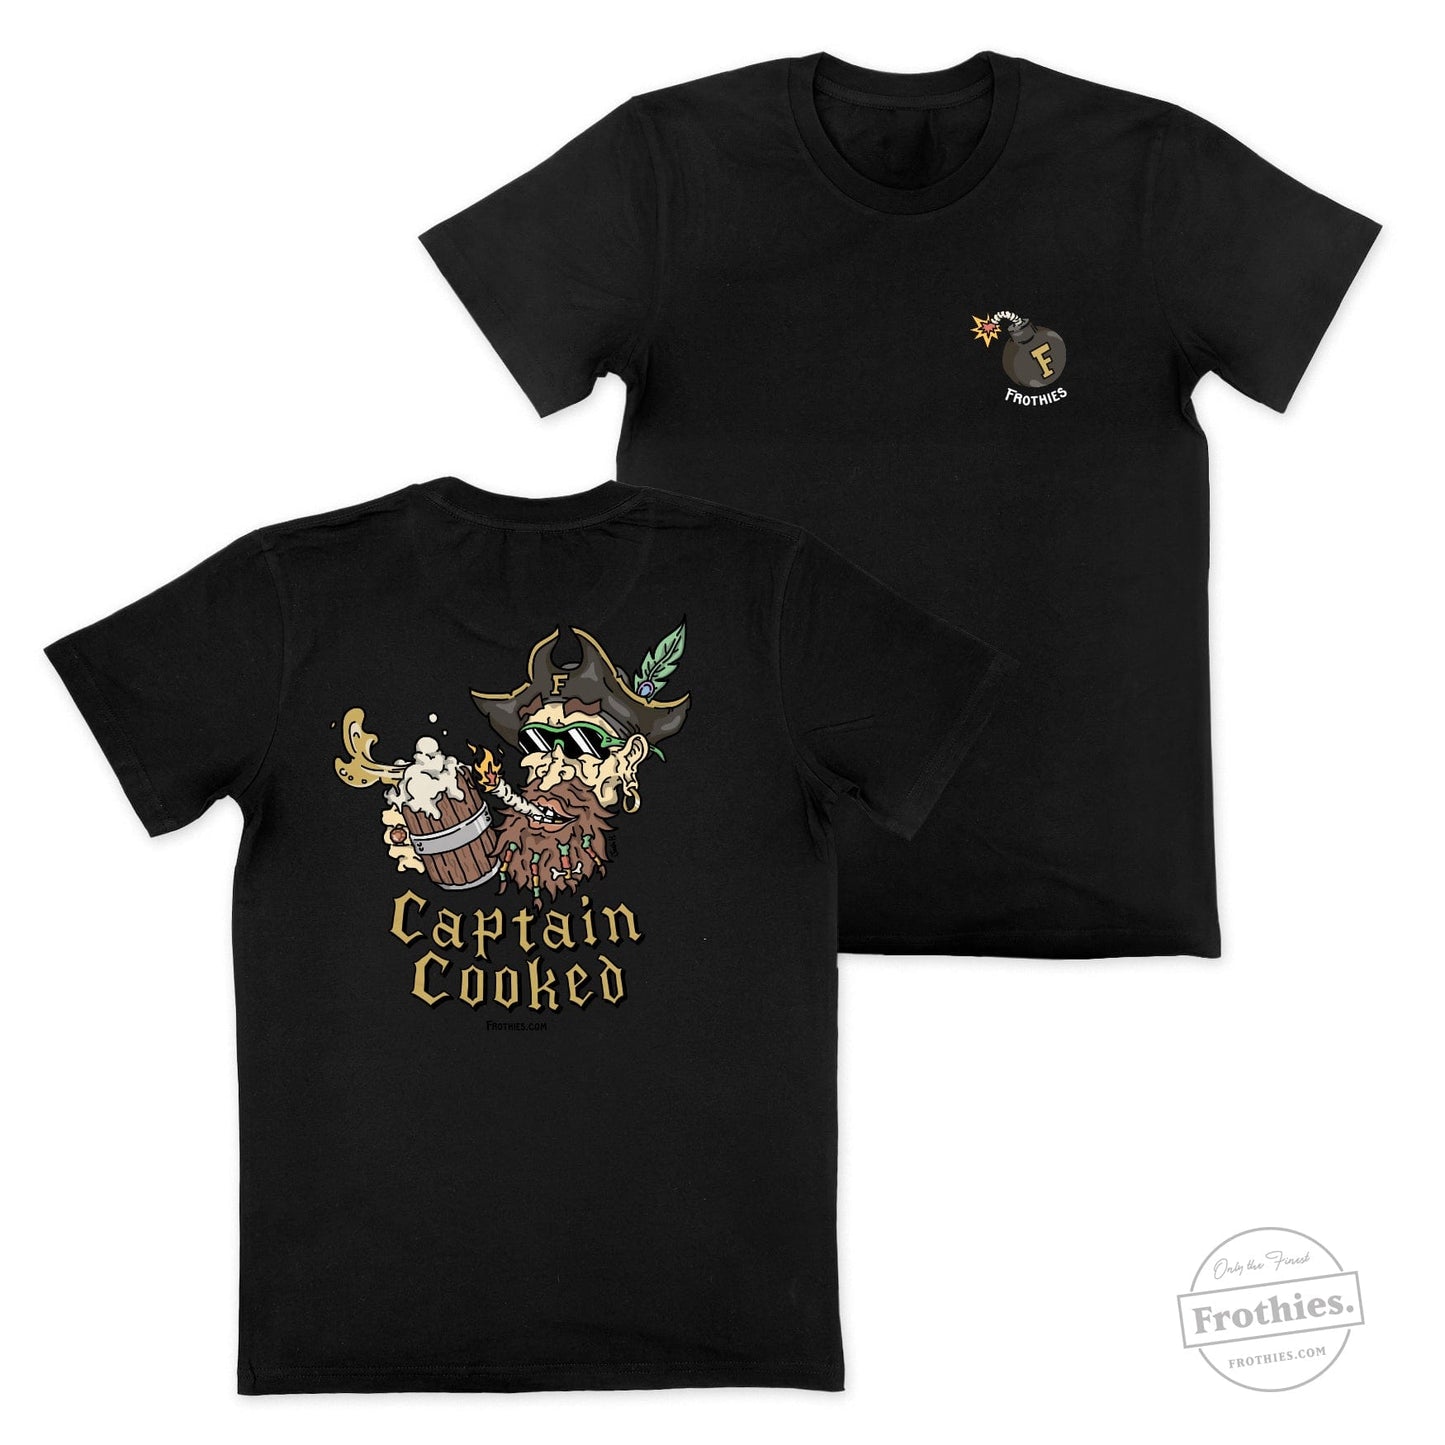 Captain Cooked Tee T-Shirt Frothies